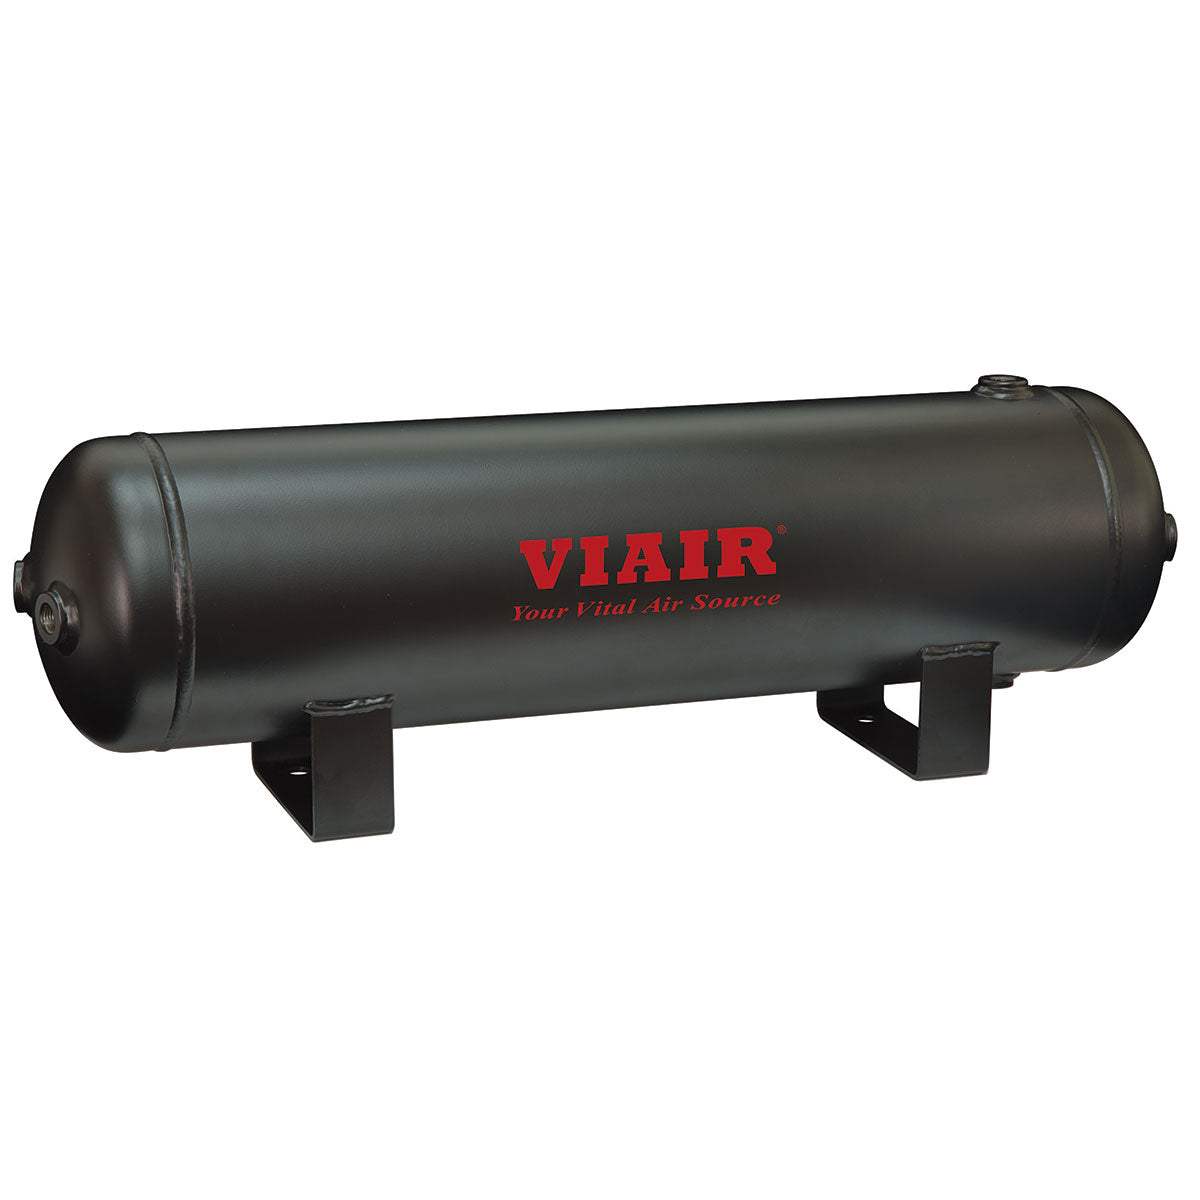 Viair 91028 2.5 Gallon Air Tank with (6) 1/4" NPT Ports - 200 PSI Rated